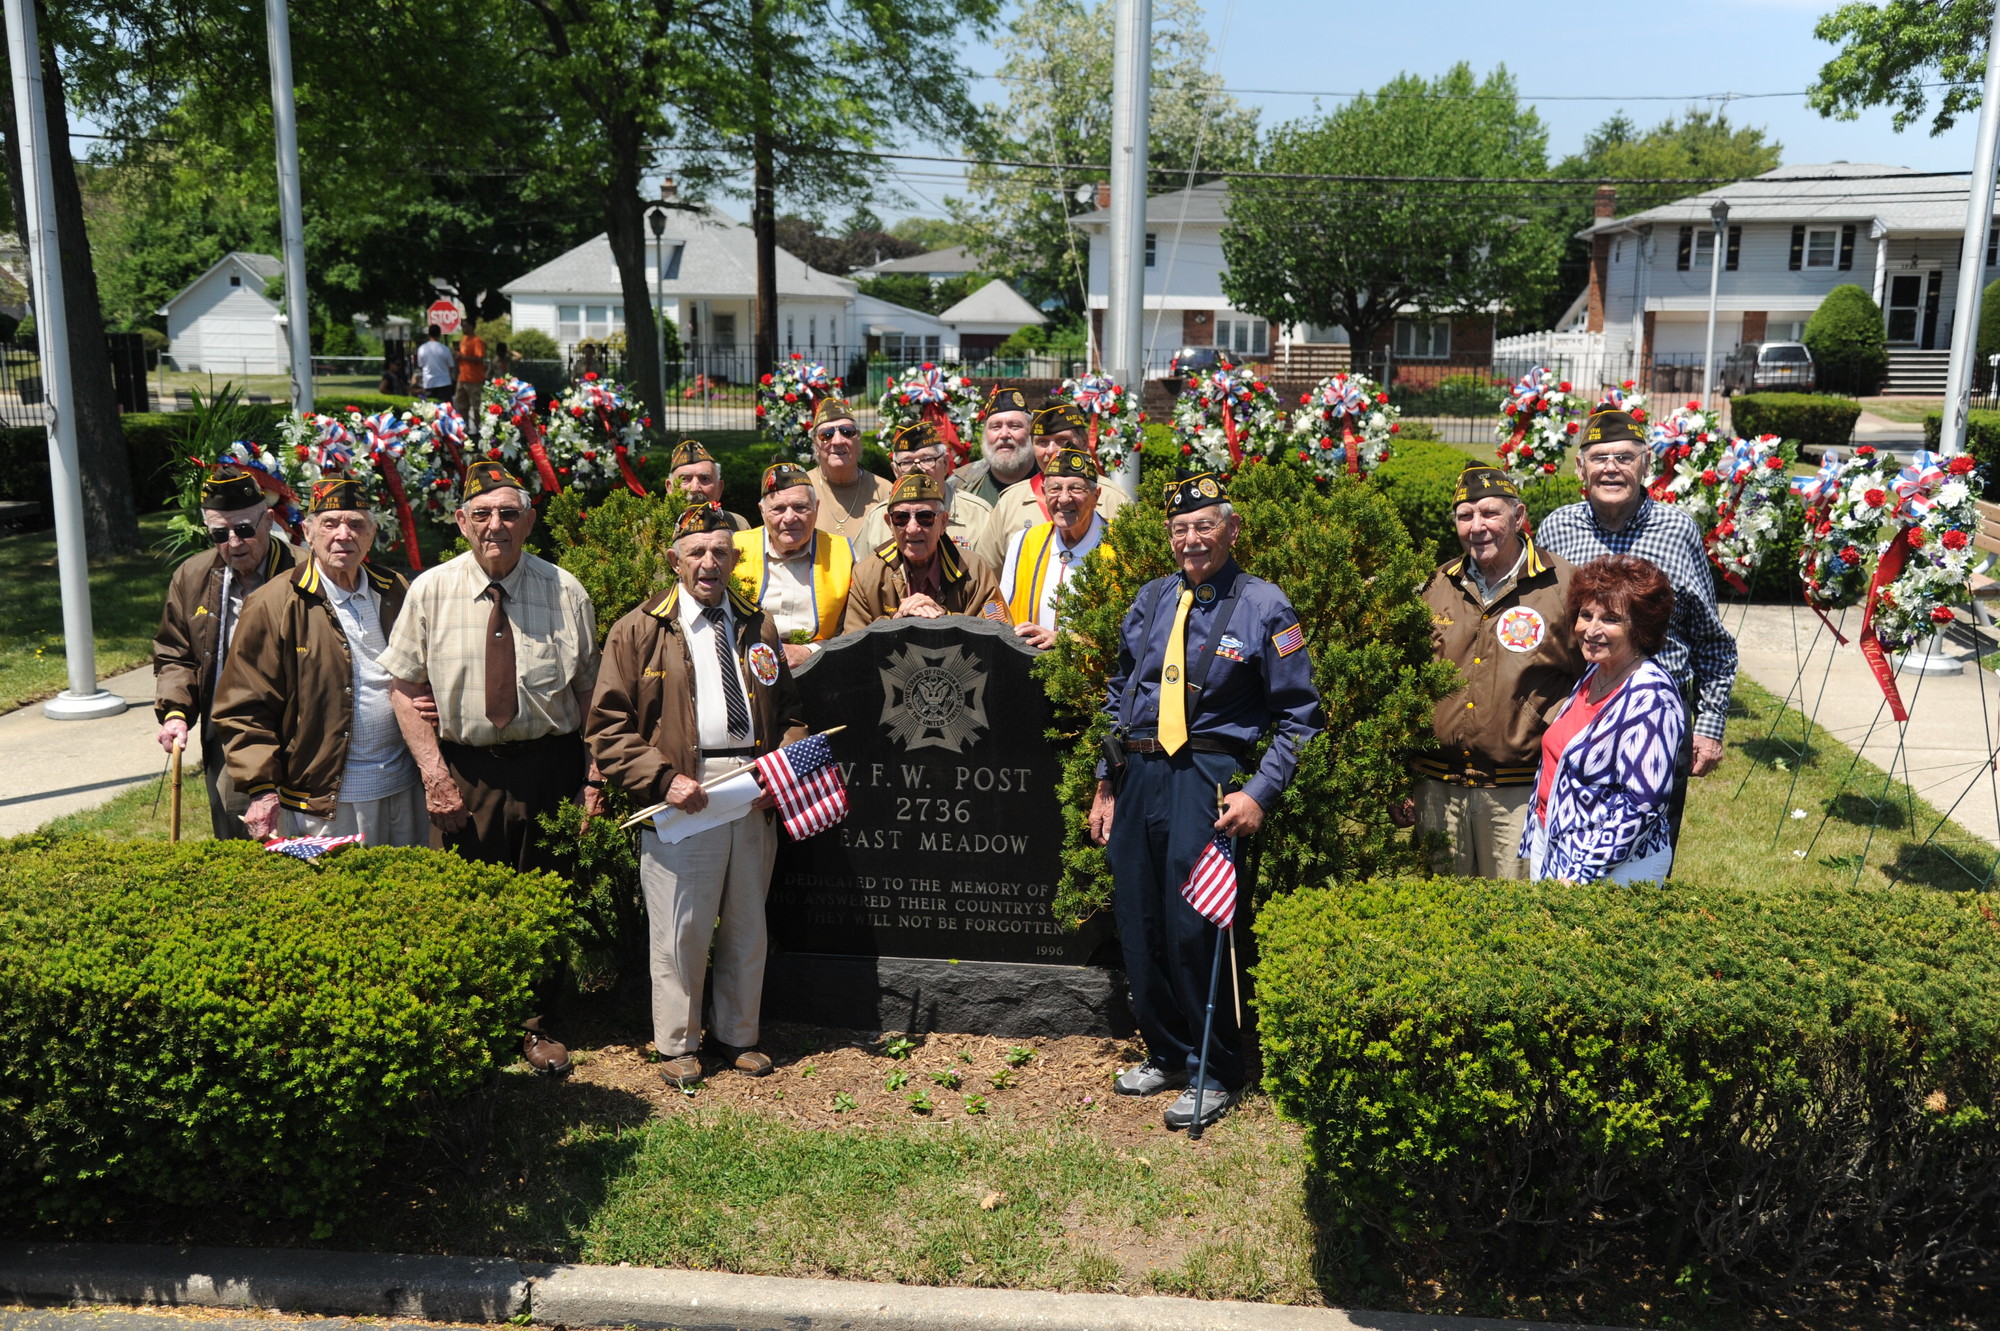 Members of East Meadow Veterans of Foreign War Post 2736 gathered in Veterans Memorial Park after Monday’s Memorial Day parade, at which thousands of community members honored servicemen and women who died defending the United States.